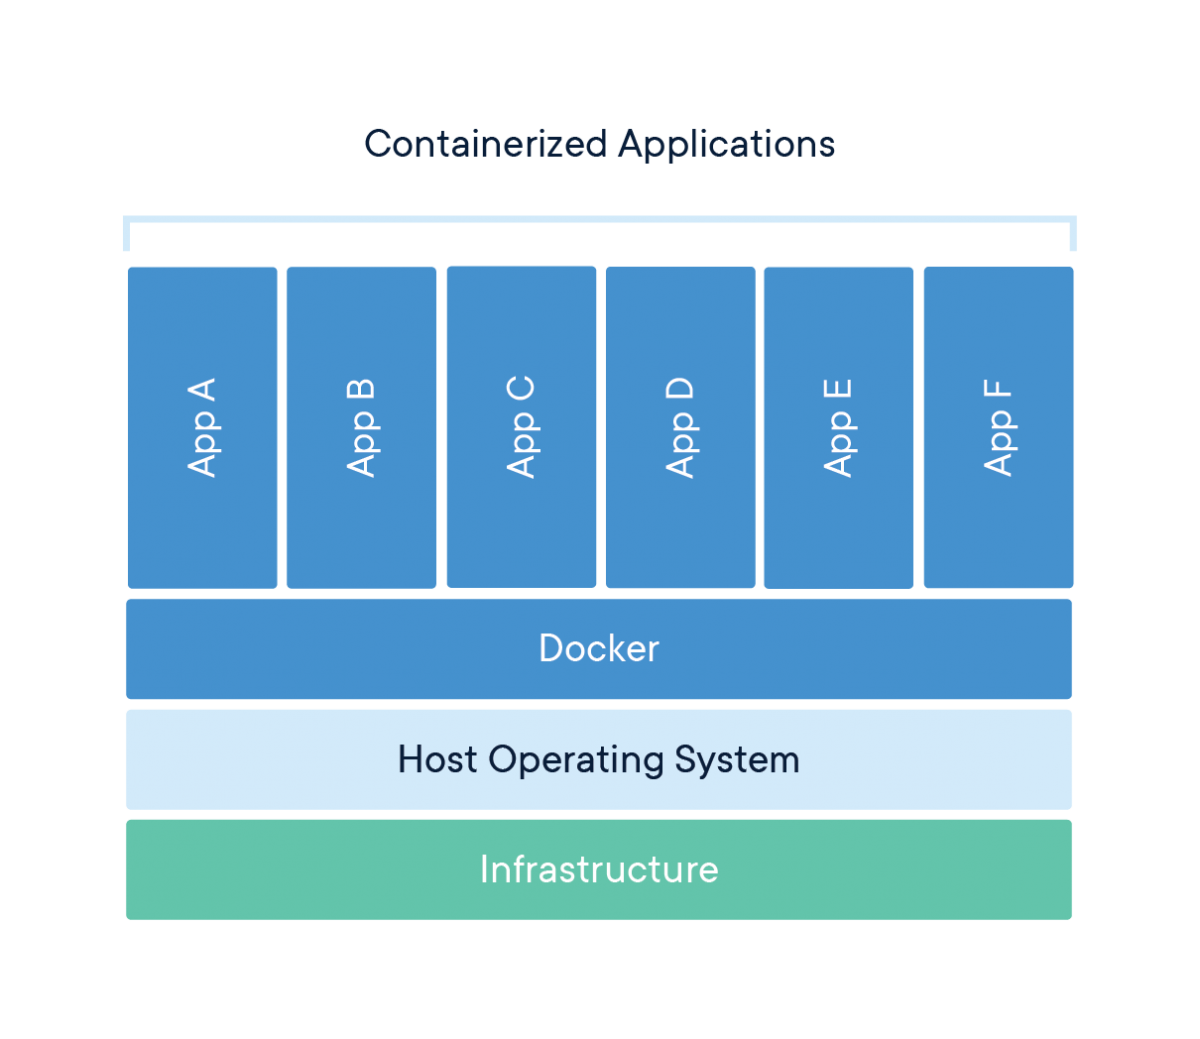 Containerized applications diagram